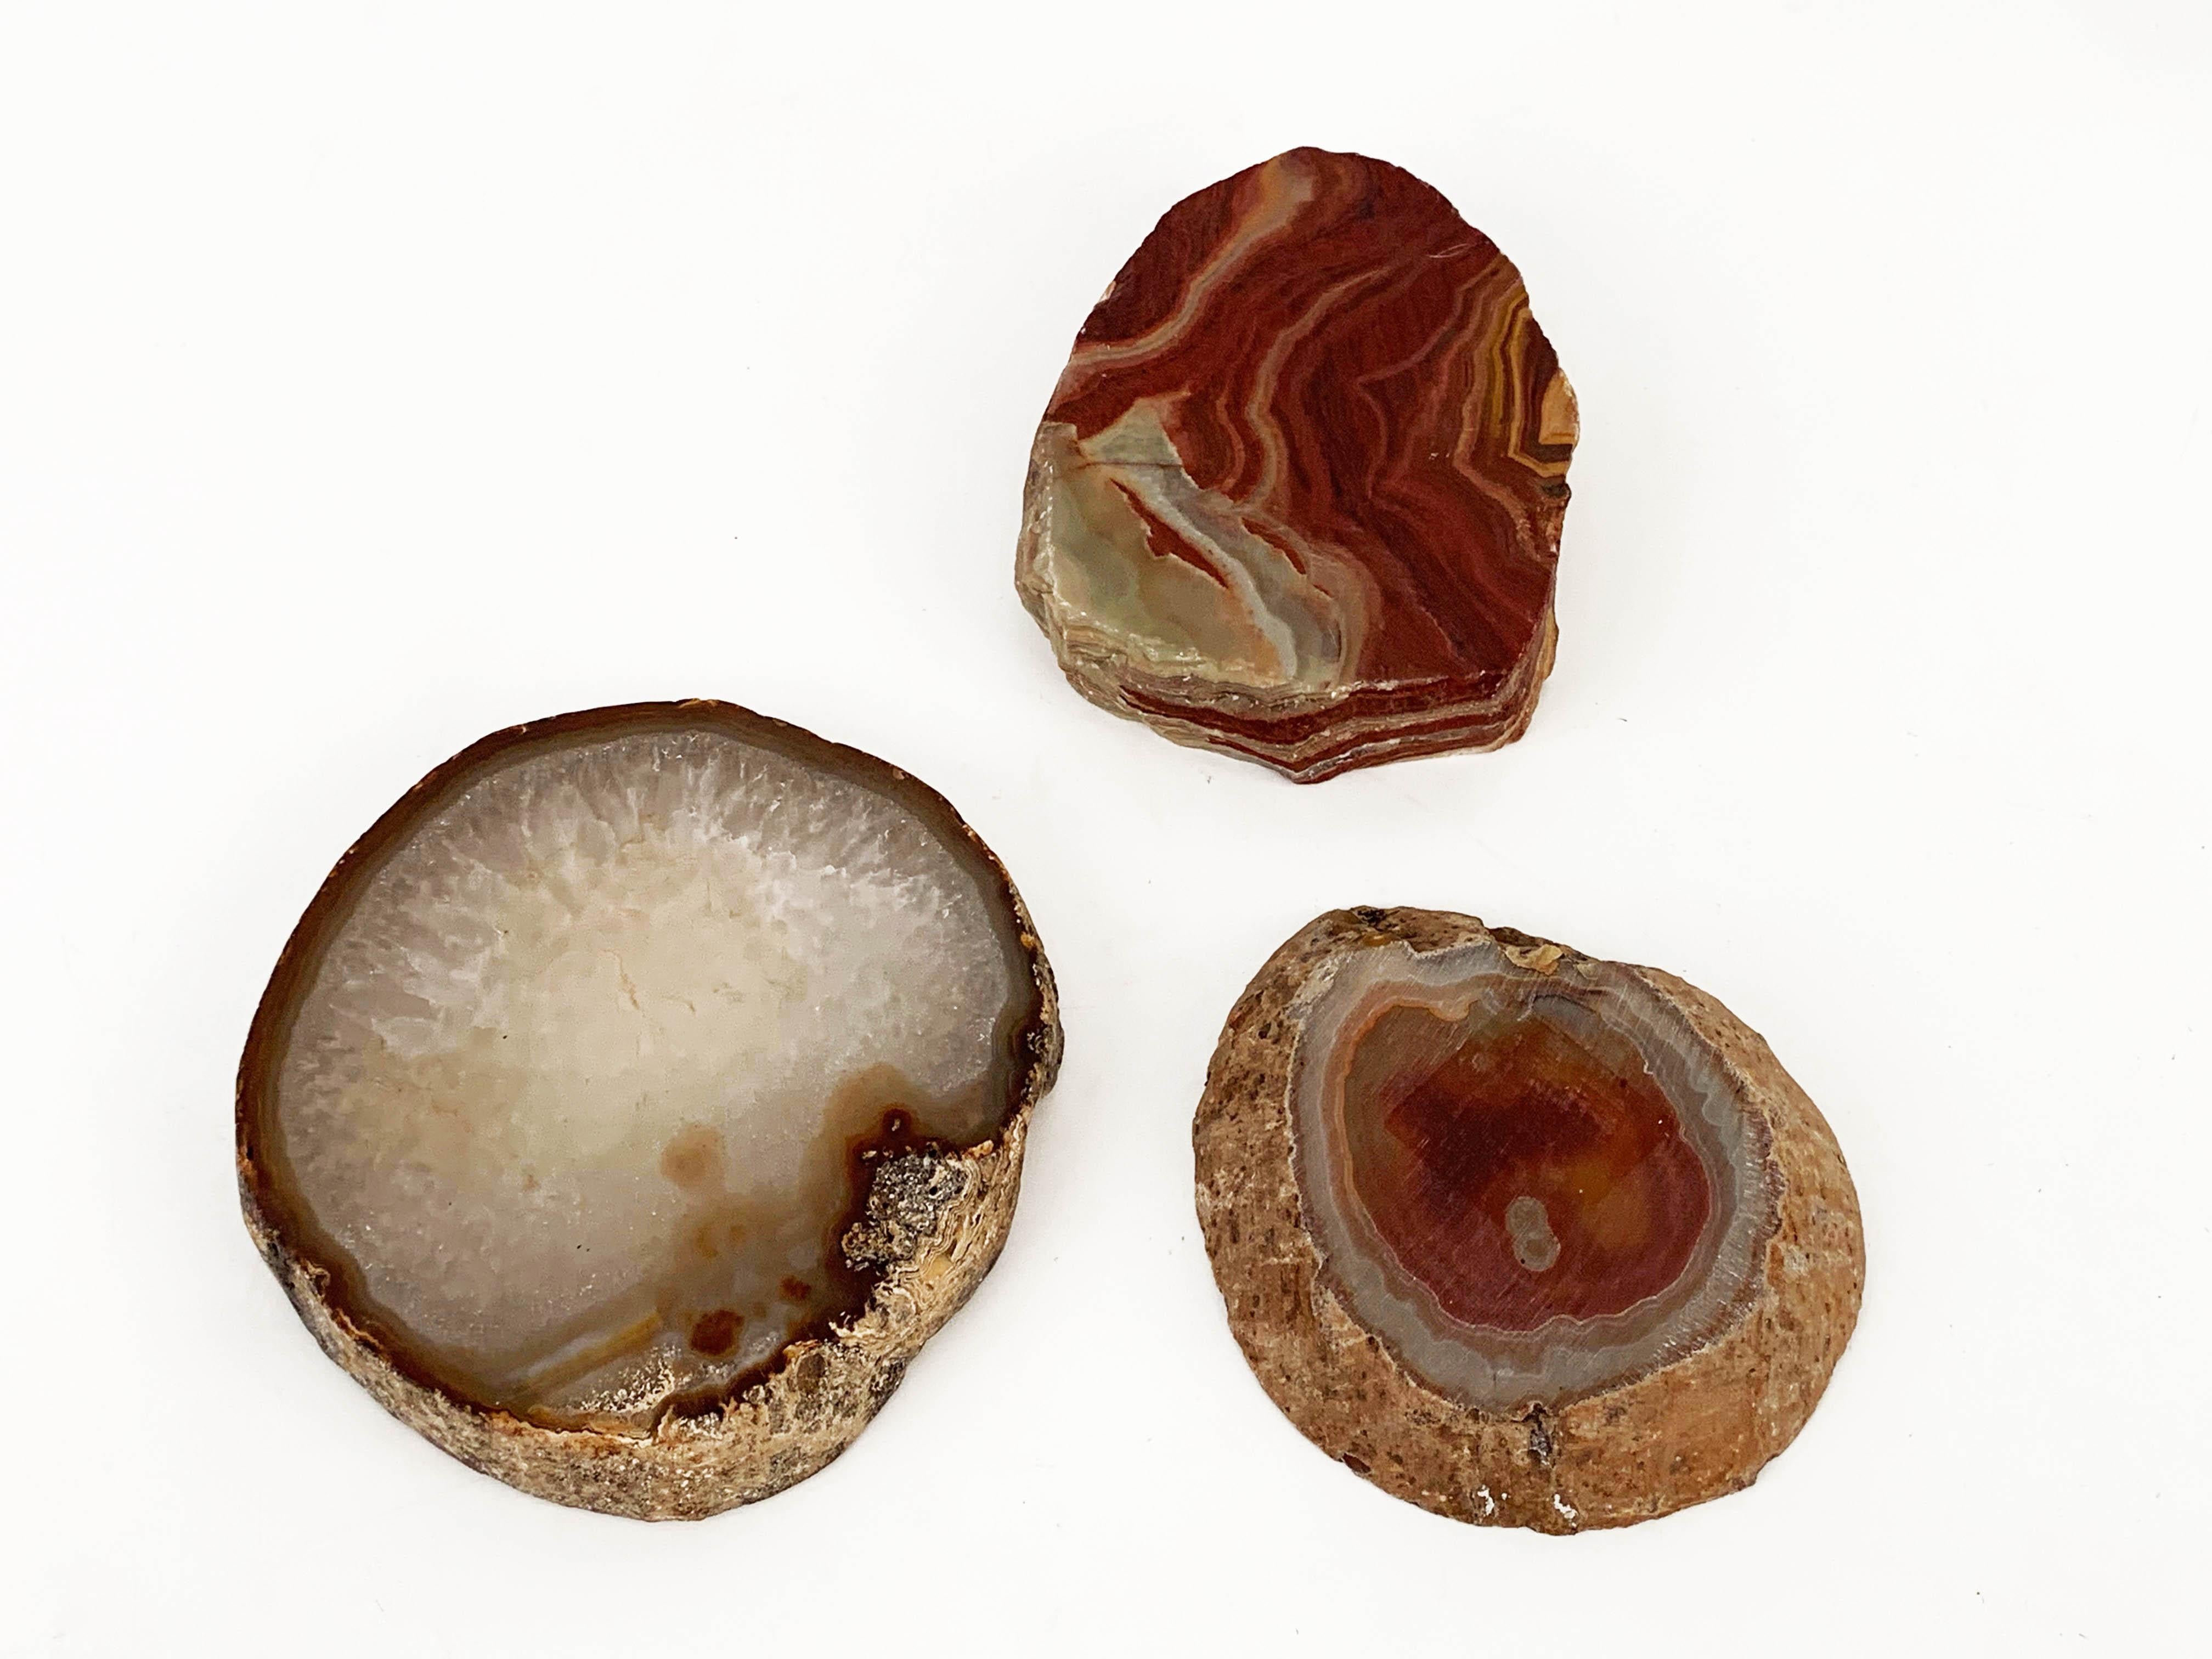 20th Century Midcentury White, Organge and Red Onyx, Agate and Quartz Decorative Geode Bowls For Sale